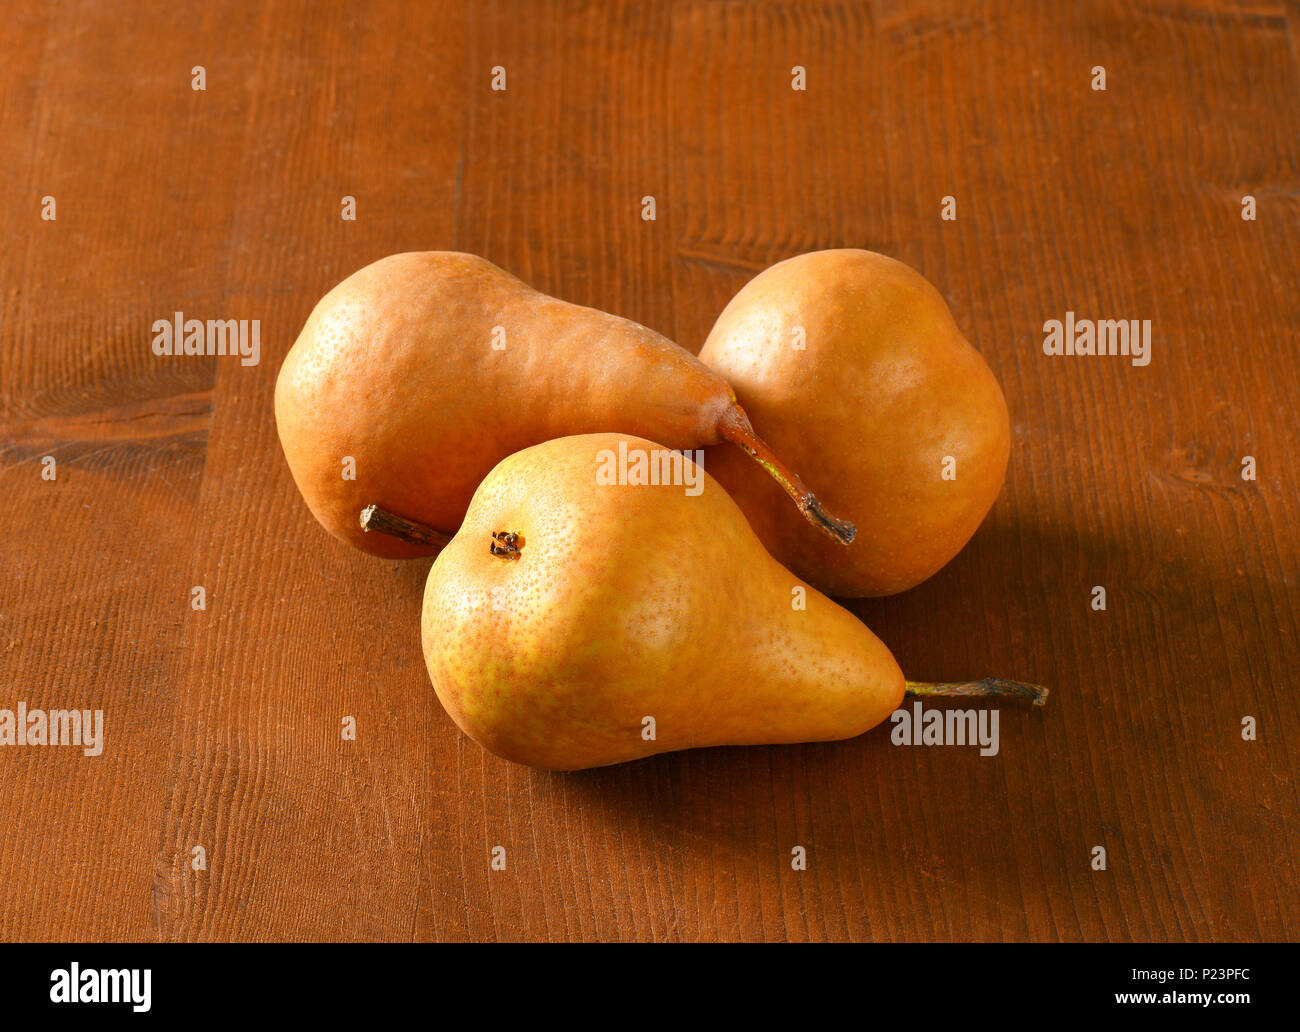 three ripe bosc pears on wooden table Stock Photo